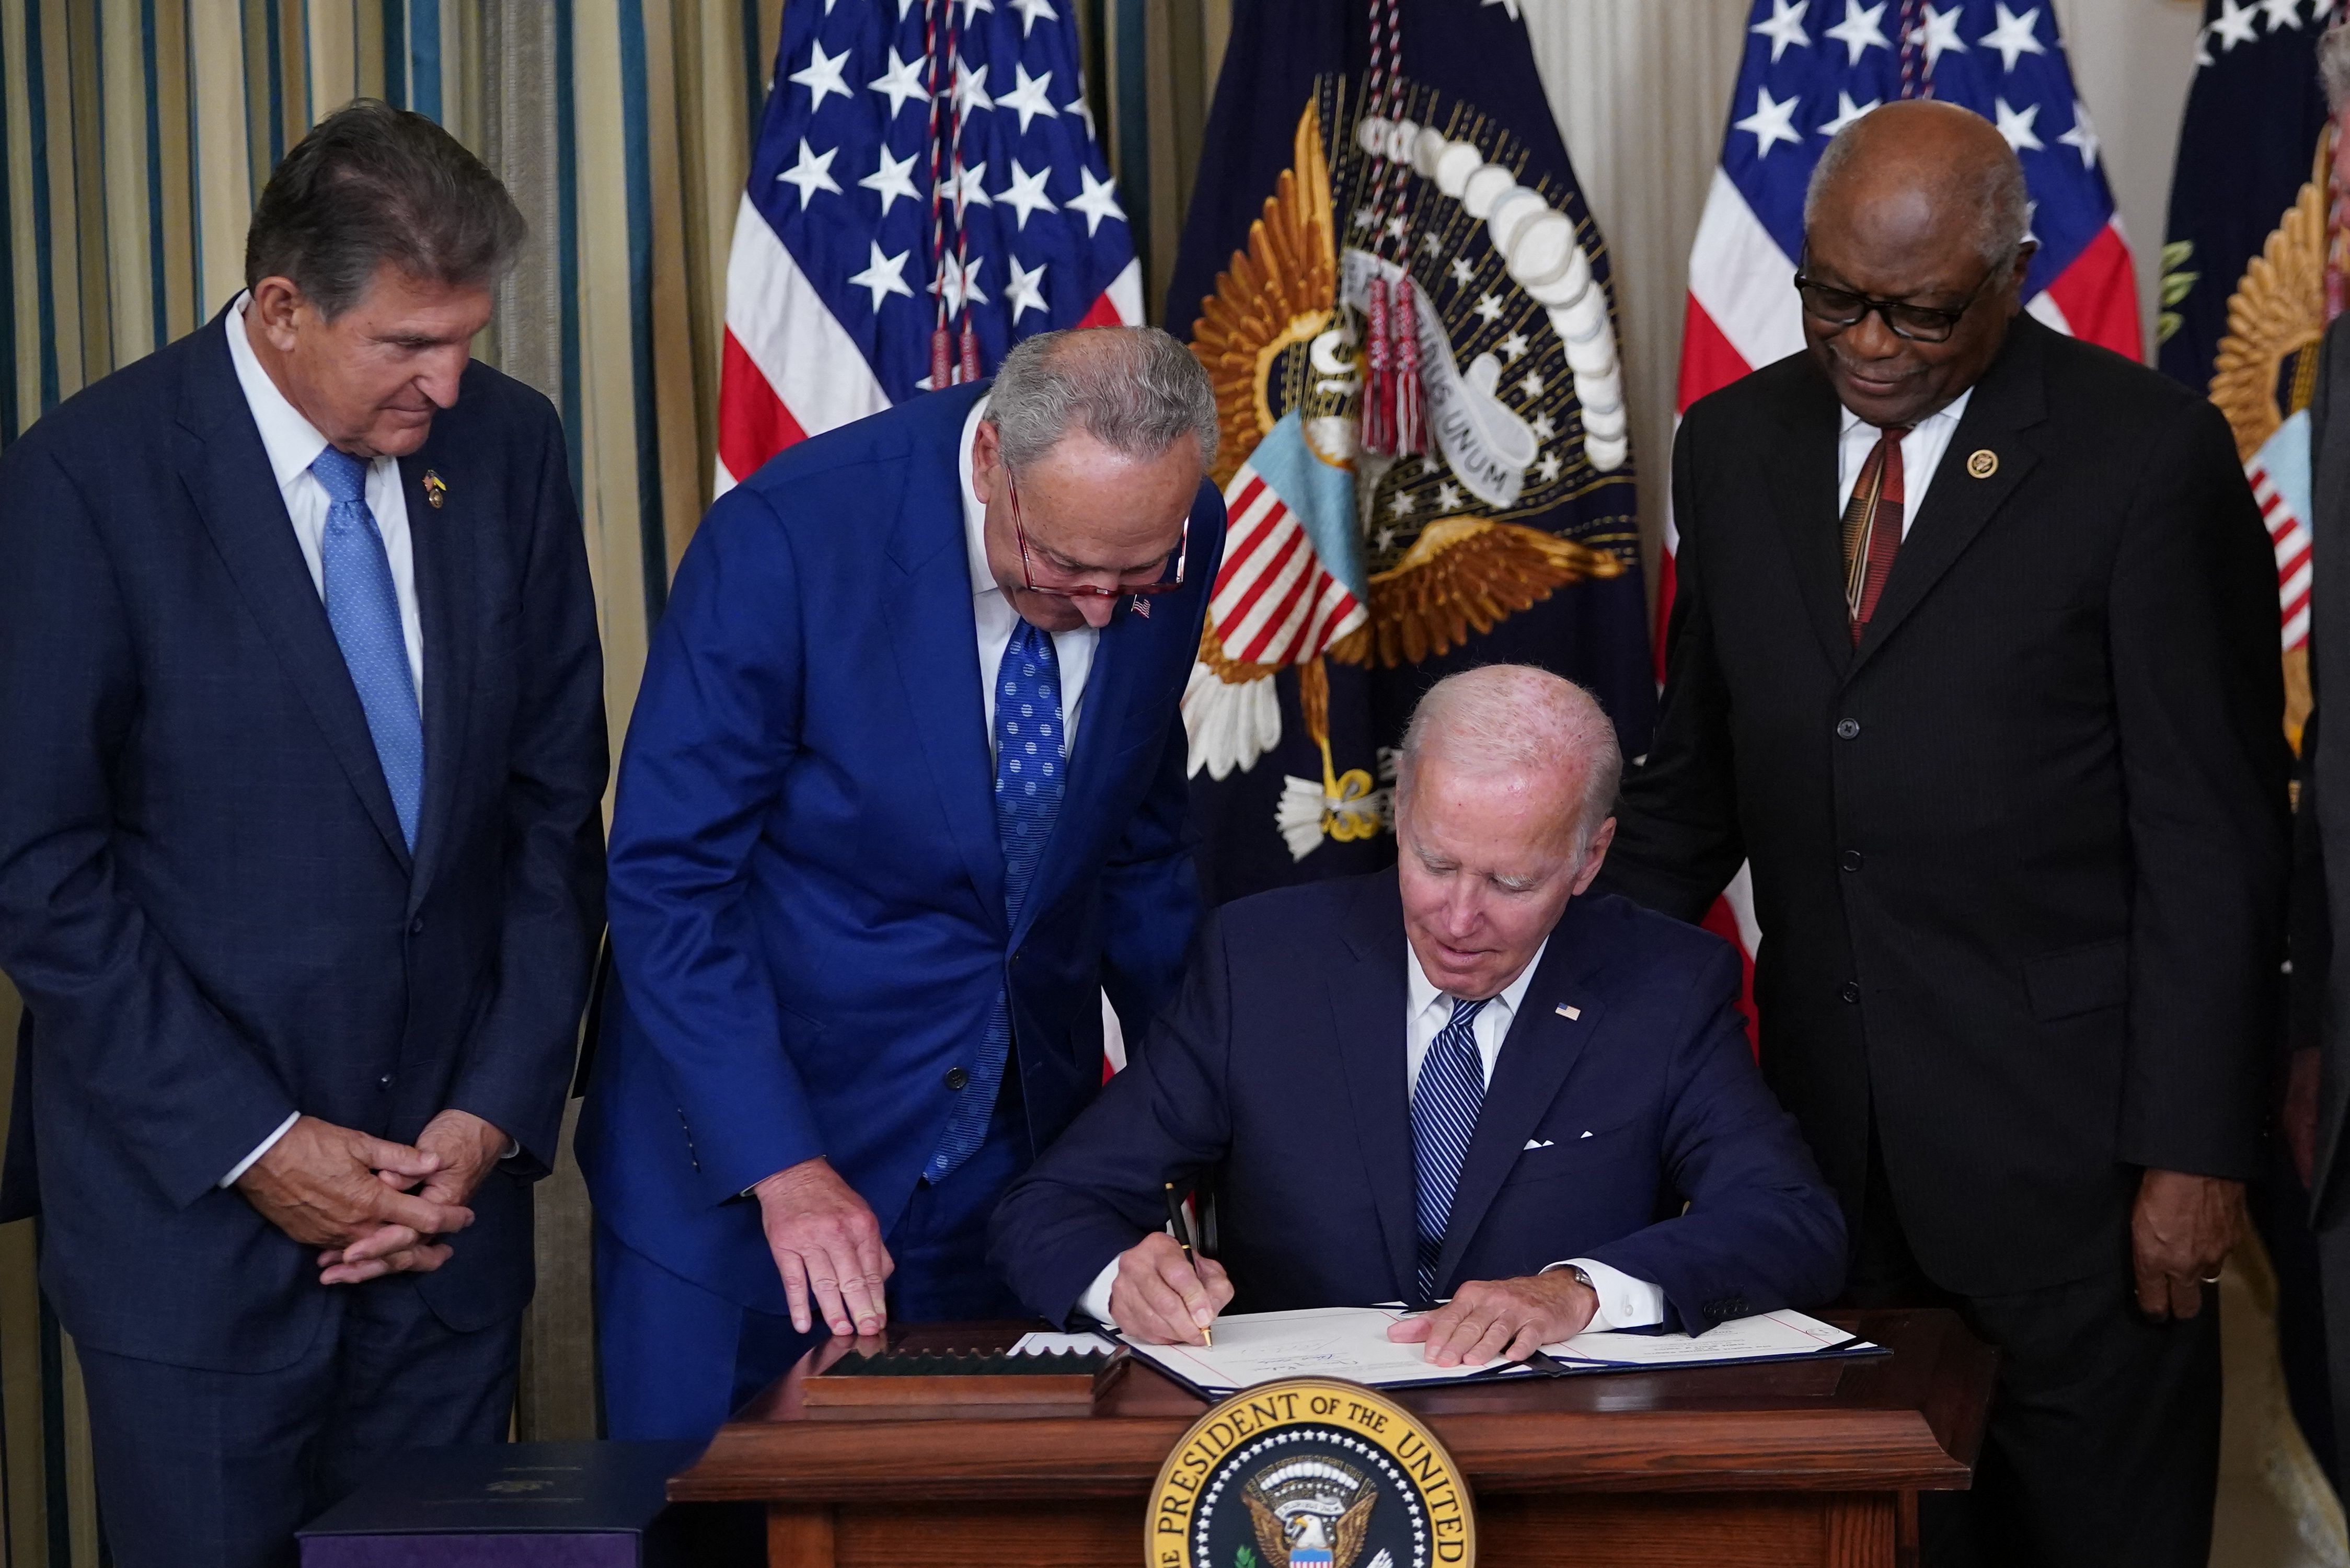 Biden Signs ‘Inflation Reduction Act’ Into Law